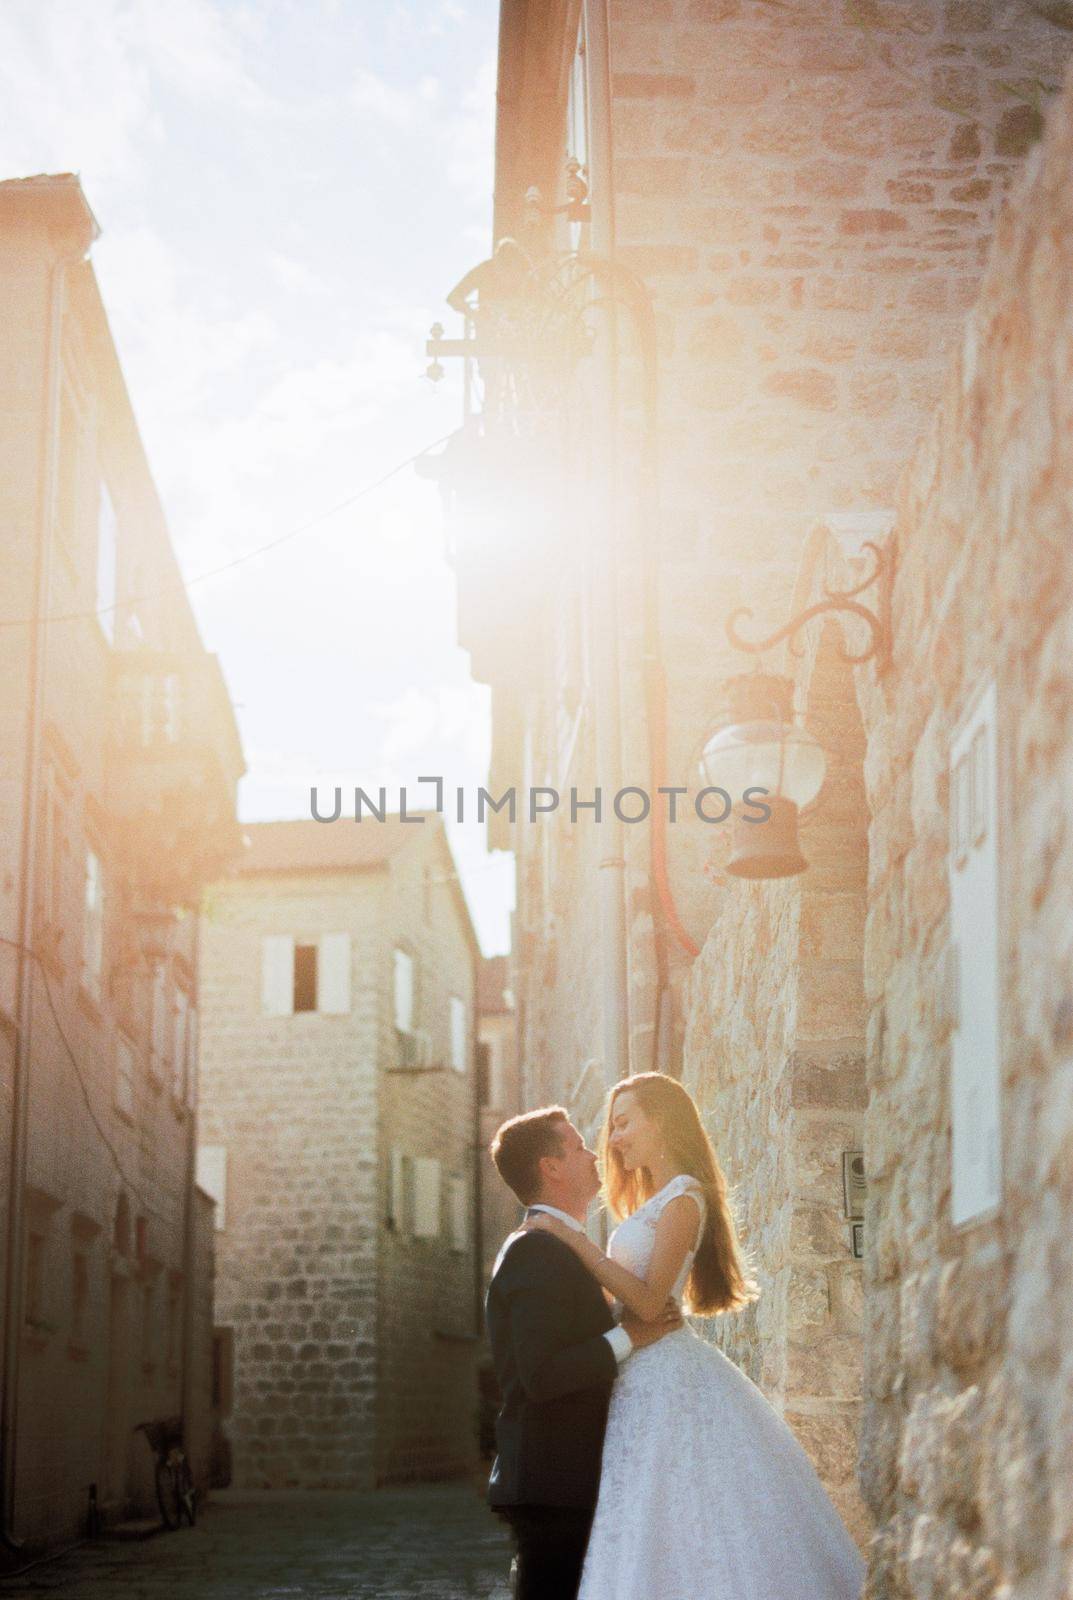 Groom lifted bride by the waist near the old stone house. High quality photo